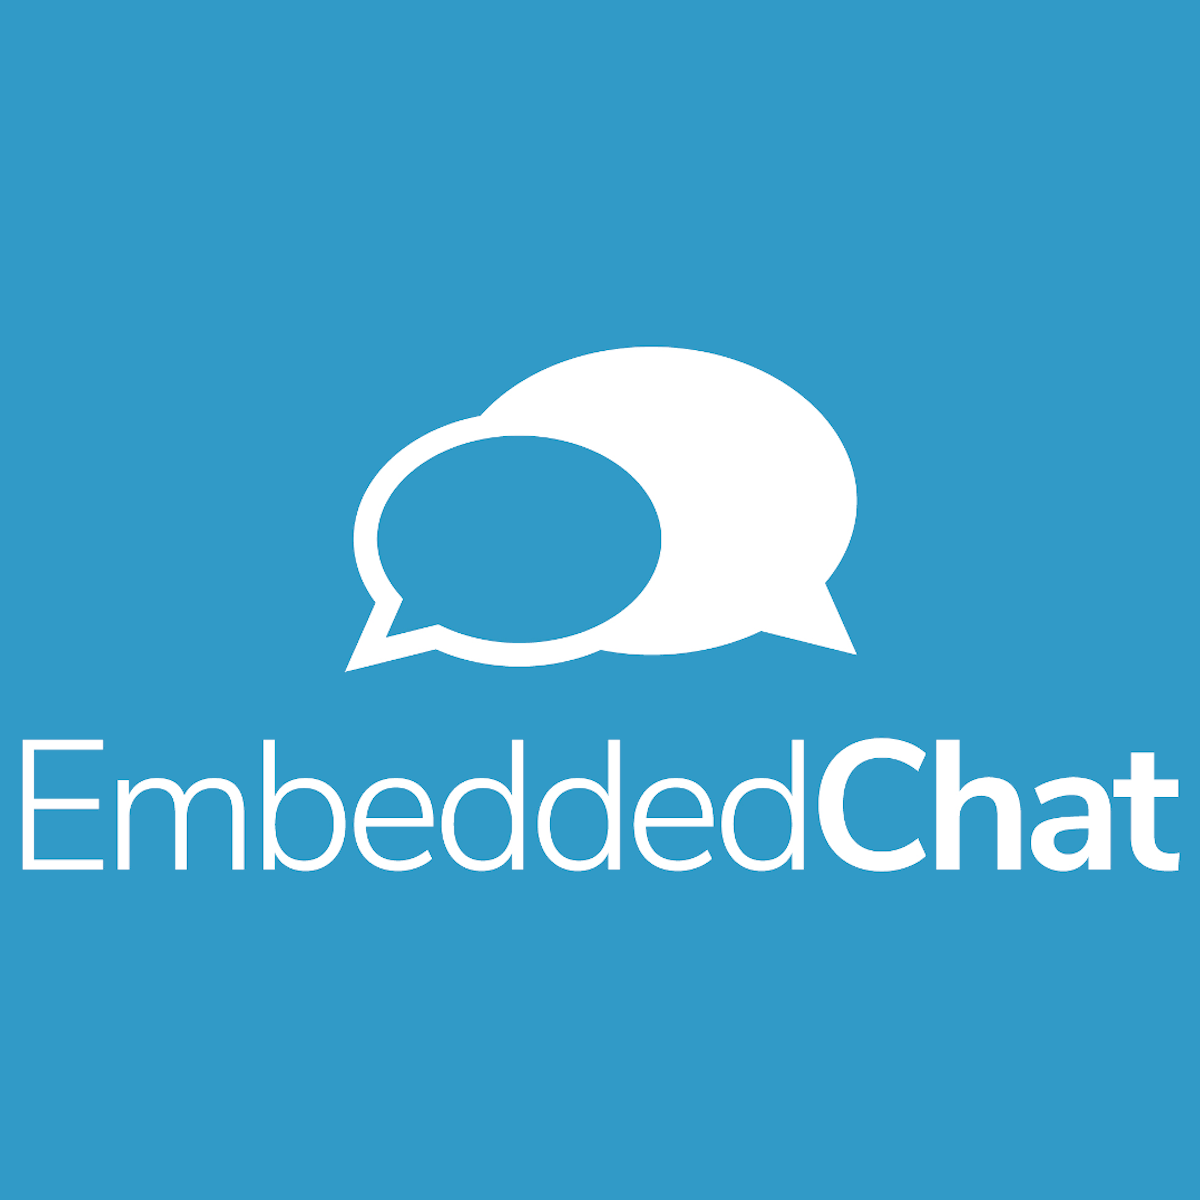 Embedded Chat